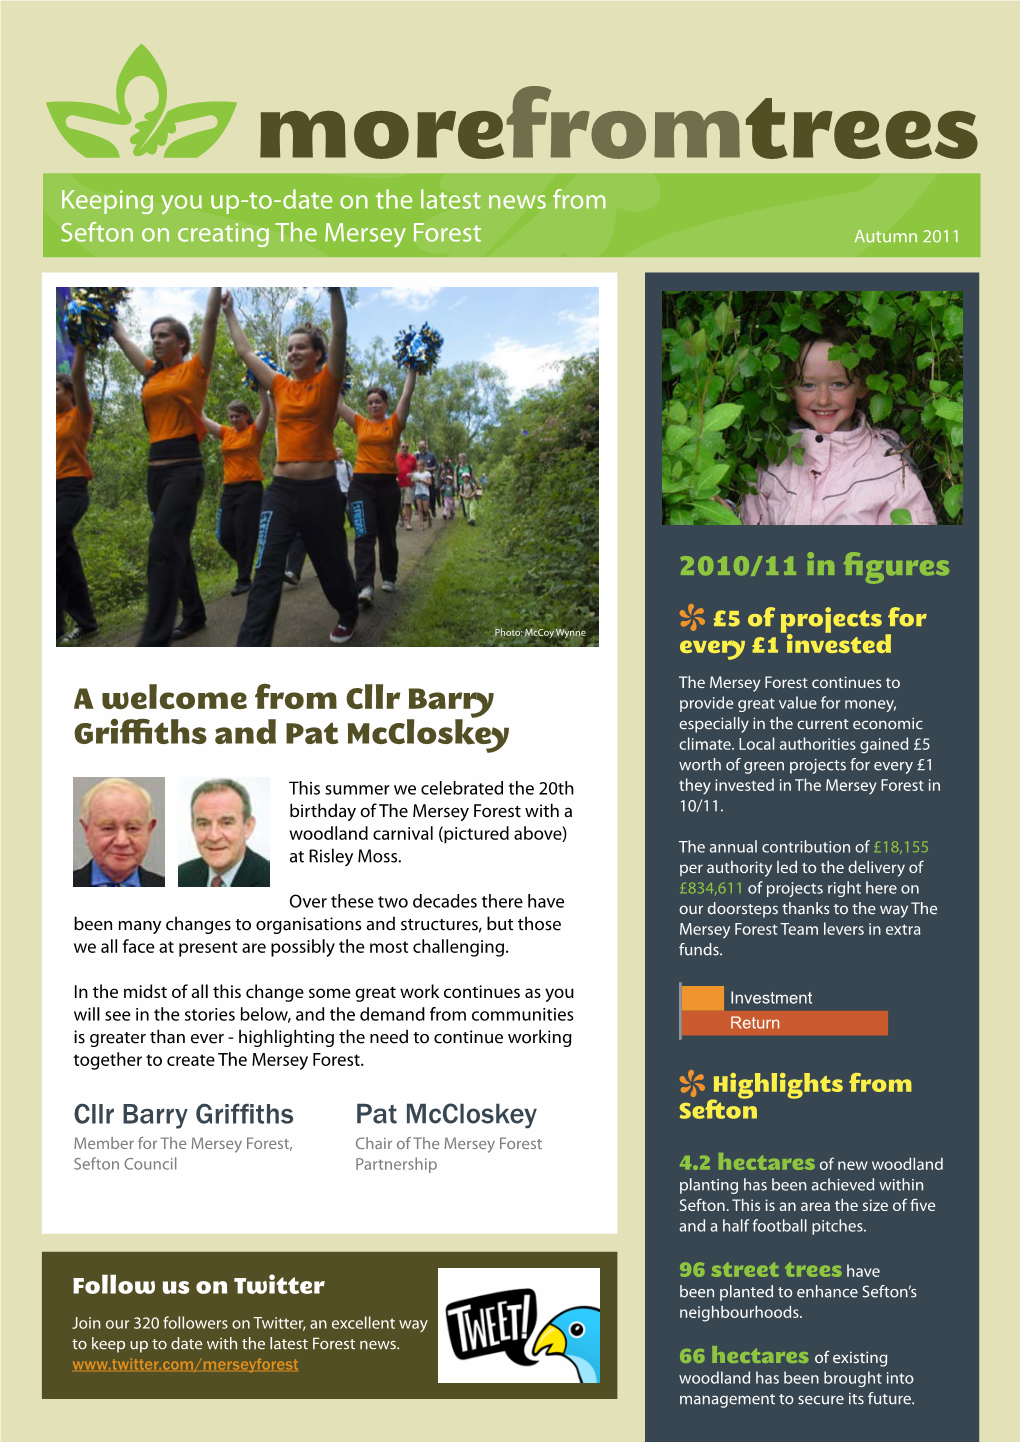 Morefromtrees Keeping You Up-To-Date on the Latest News from Sefton on Creating the Mersey Forest Autumn 2011